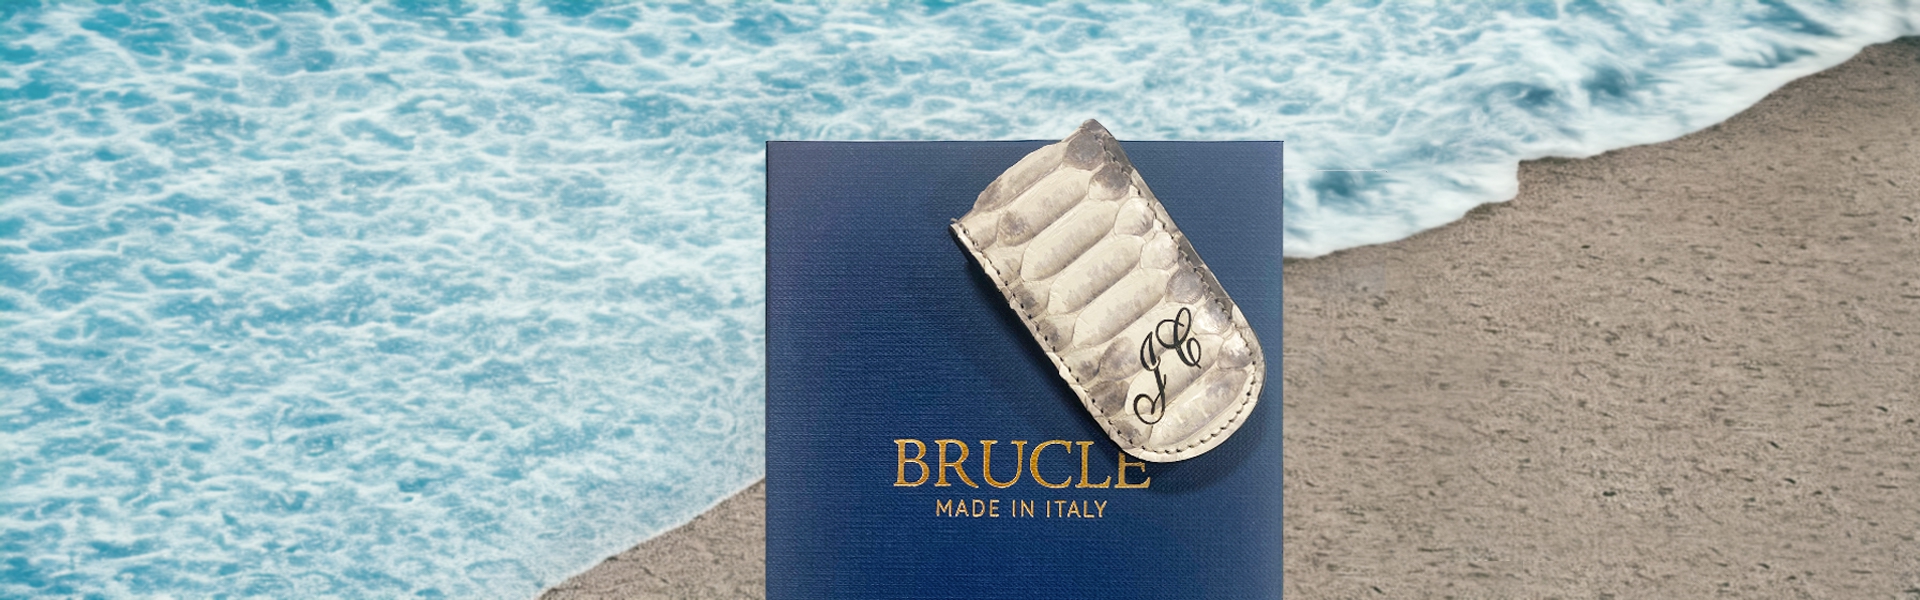 Brucle's luxury magnetic money clips: elegance and functionality